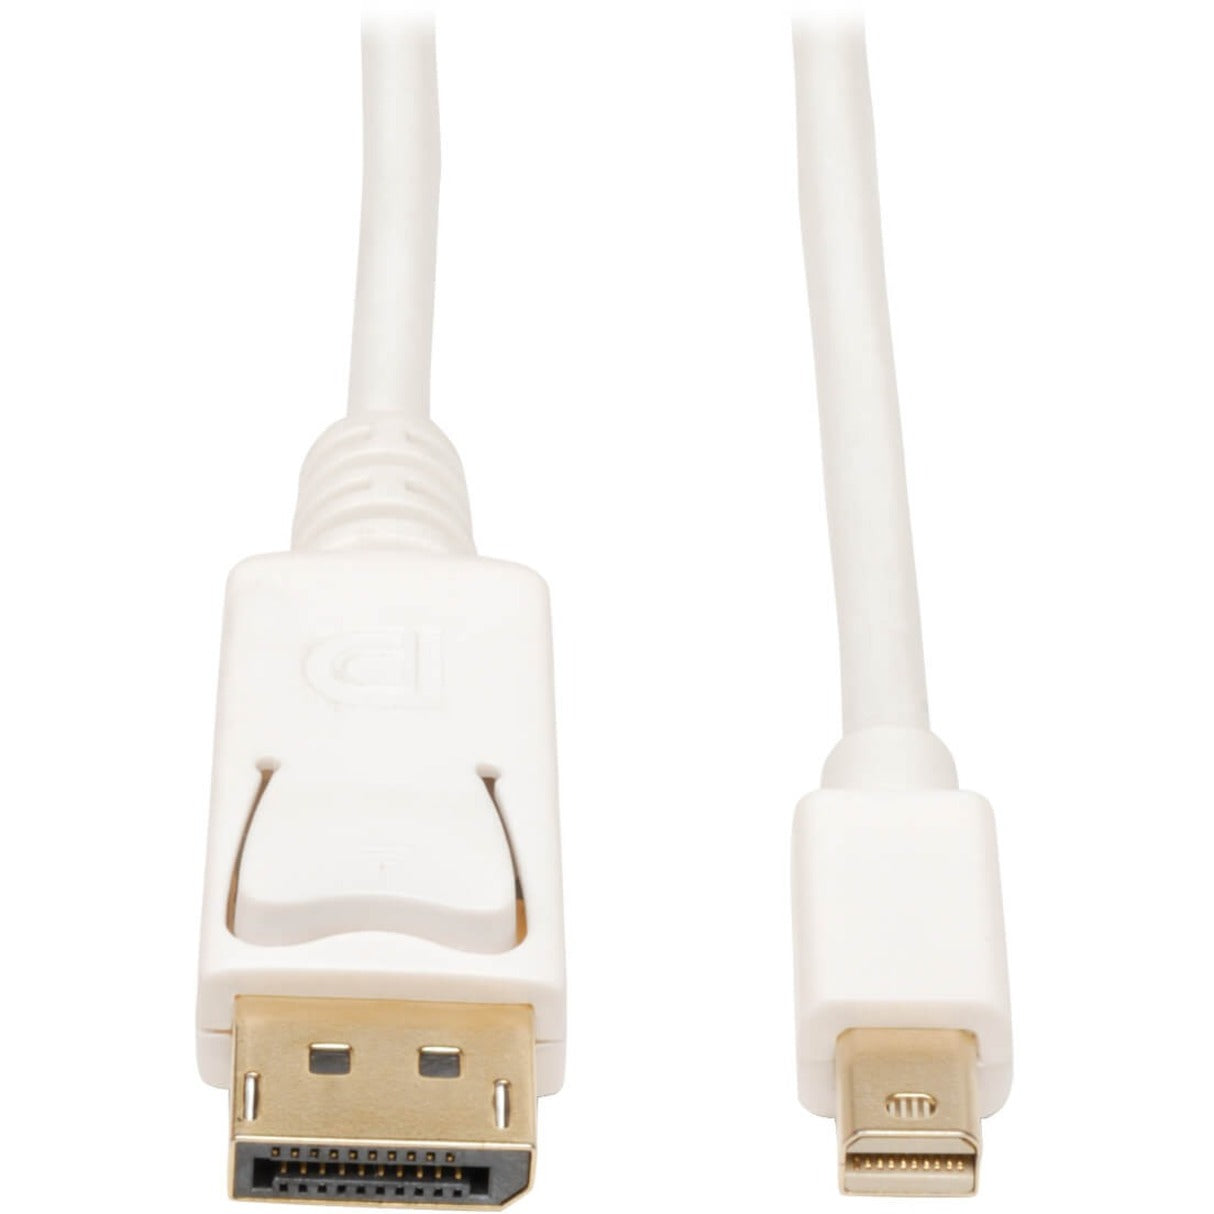 Tripp Lite P583-010 10ft Mini Displayport to Displayport Cable, Connect your PC or Mac to a Displayport Monitor or TV